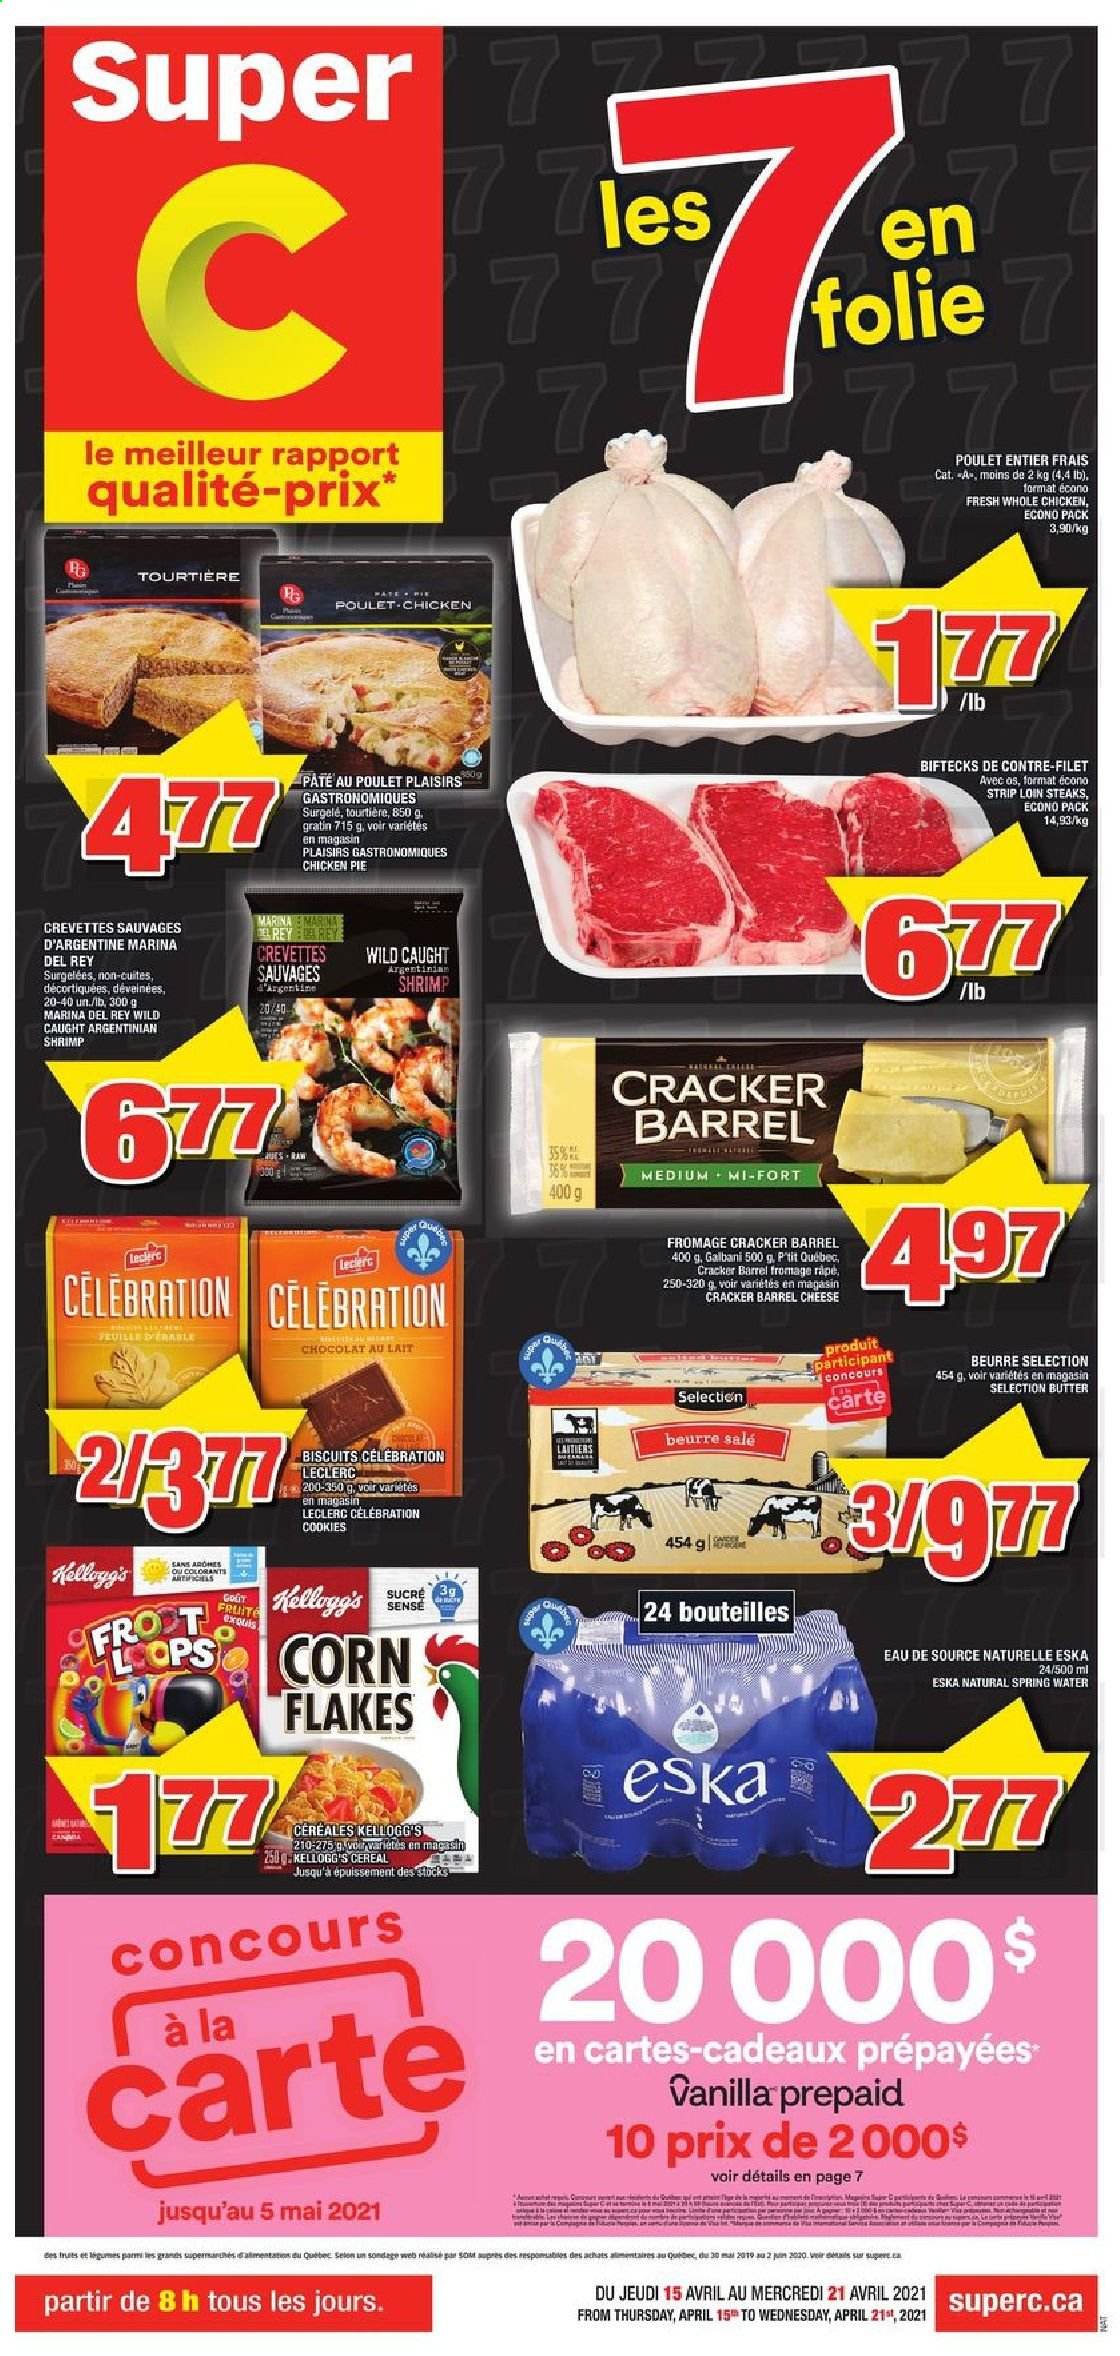 thumbnail - Super C Flyer - April 15, 2021 - April 21, 2021 - Sales products - pie, shrimps, cheese, Galbani, butter, cookies, Celebration, crackers, Kellogg's, biscuit, cereals, corn flakes, spring water, whole chicken, chicken, steak. Page 1.